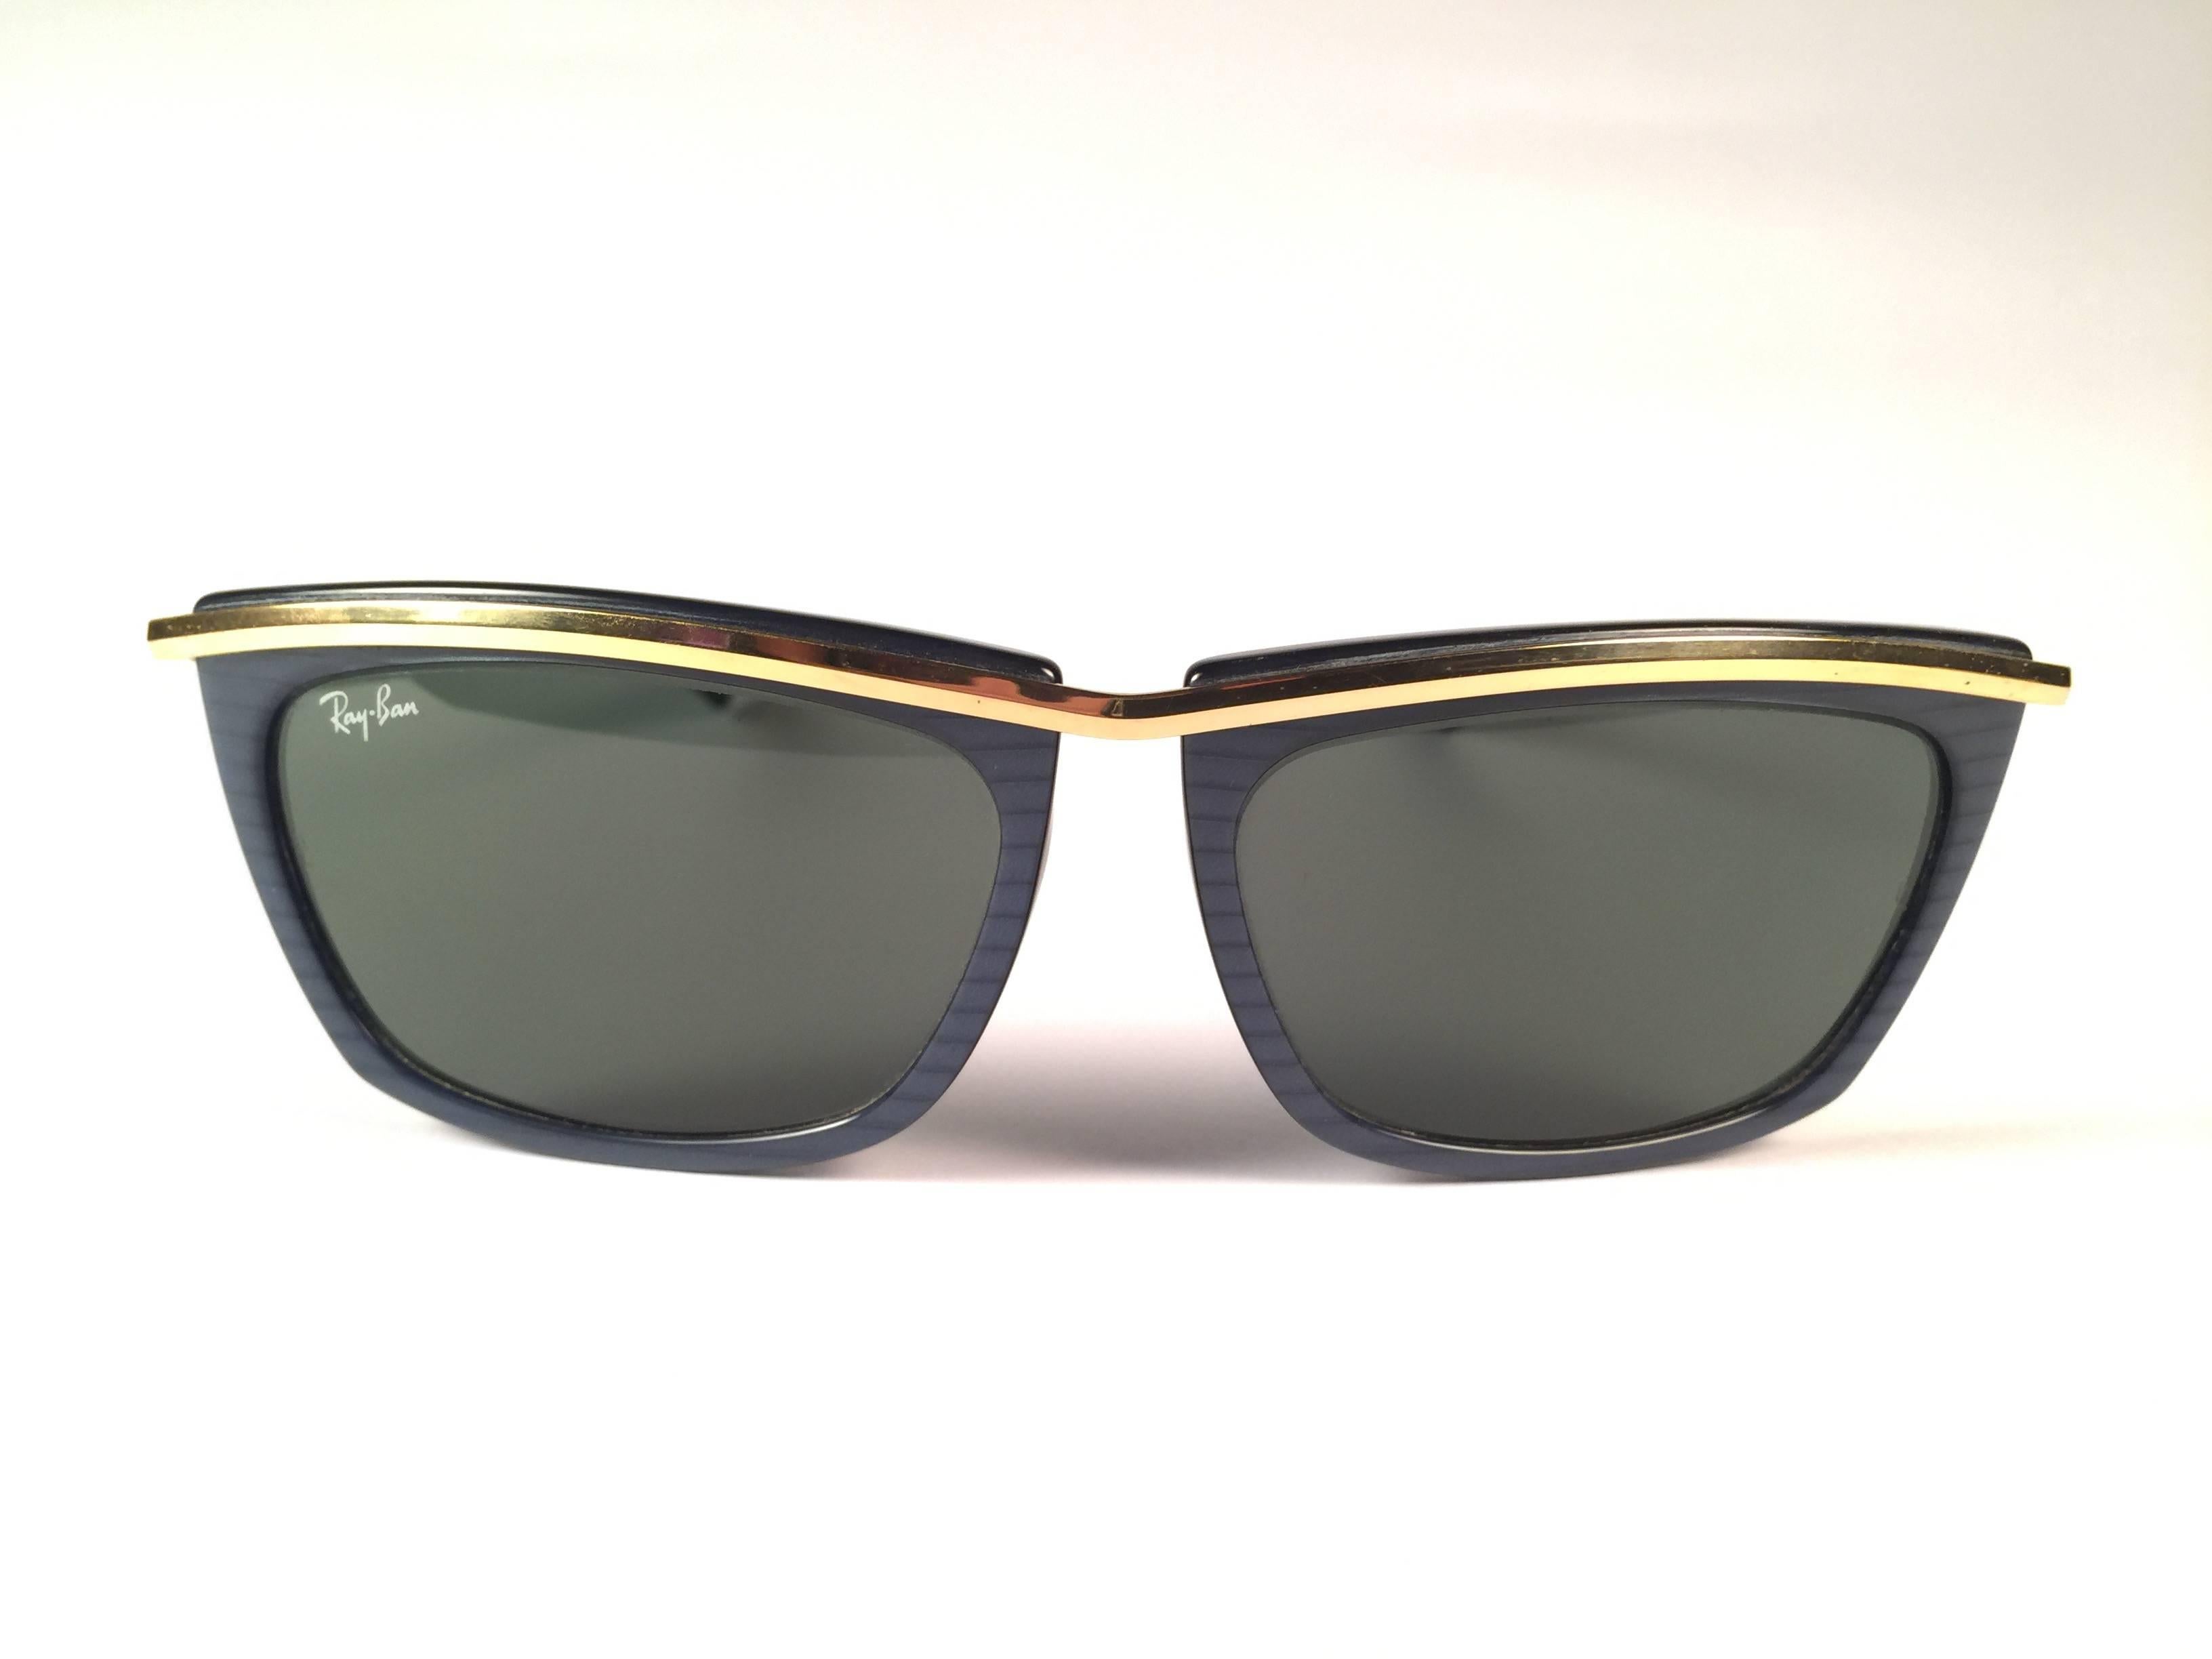 New Vintage Ray Ban Olympia gold and blue frame holding a pair of G15 grey lenses.

New, never worn or displayed. This pair show minor sign of wear due to storage.

Designed and produced in USA.